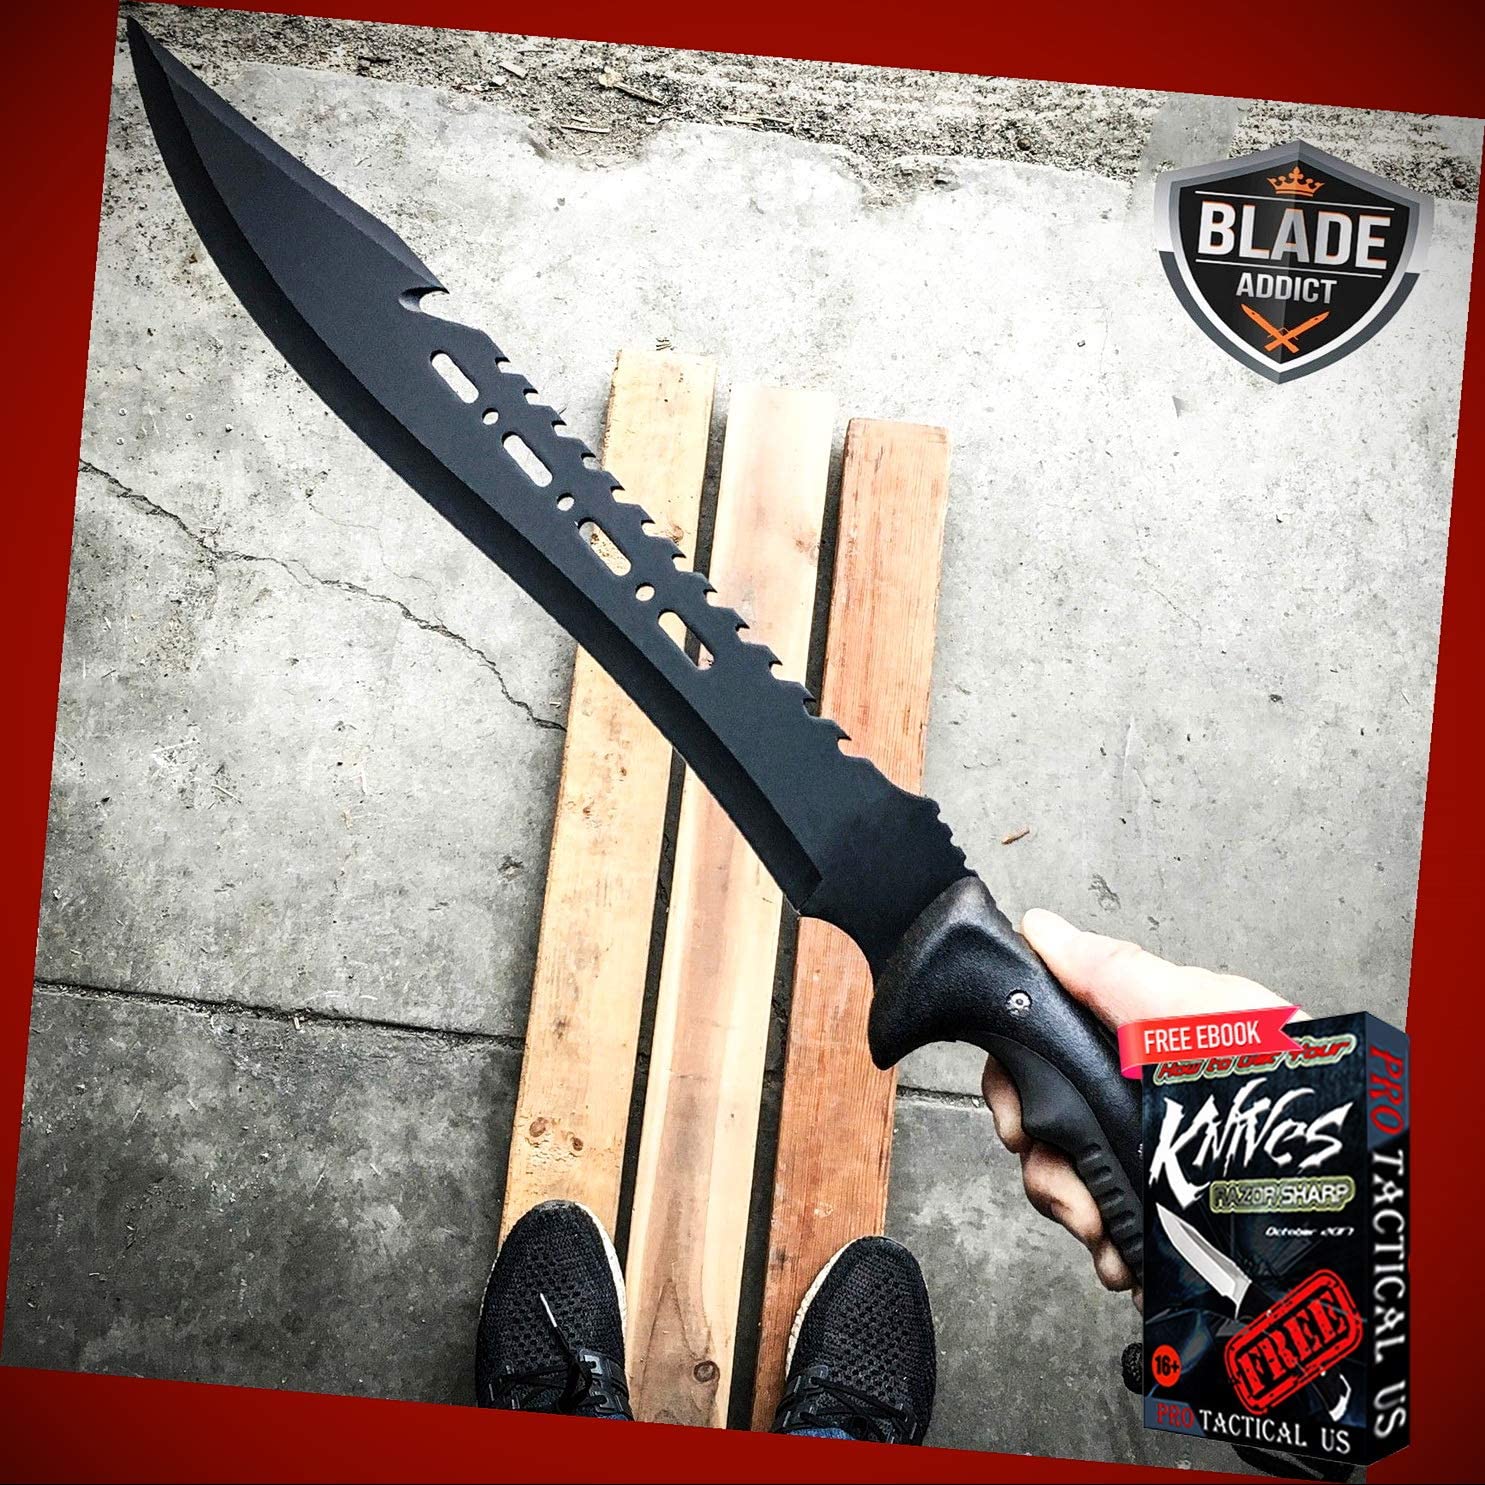 New 25" inch FULL TANG HUNTING SURVIVAL FIXED BLADE MACHETE TACTICAL Rambo ProTactical Knife Sword BA-1462kn by PrTac-US